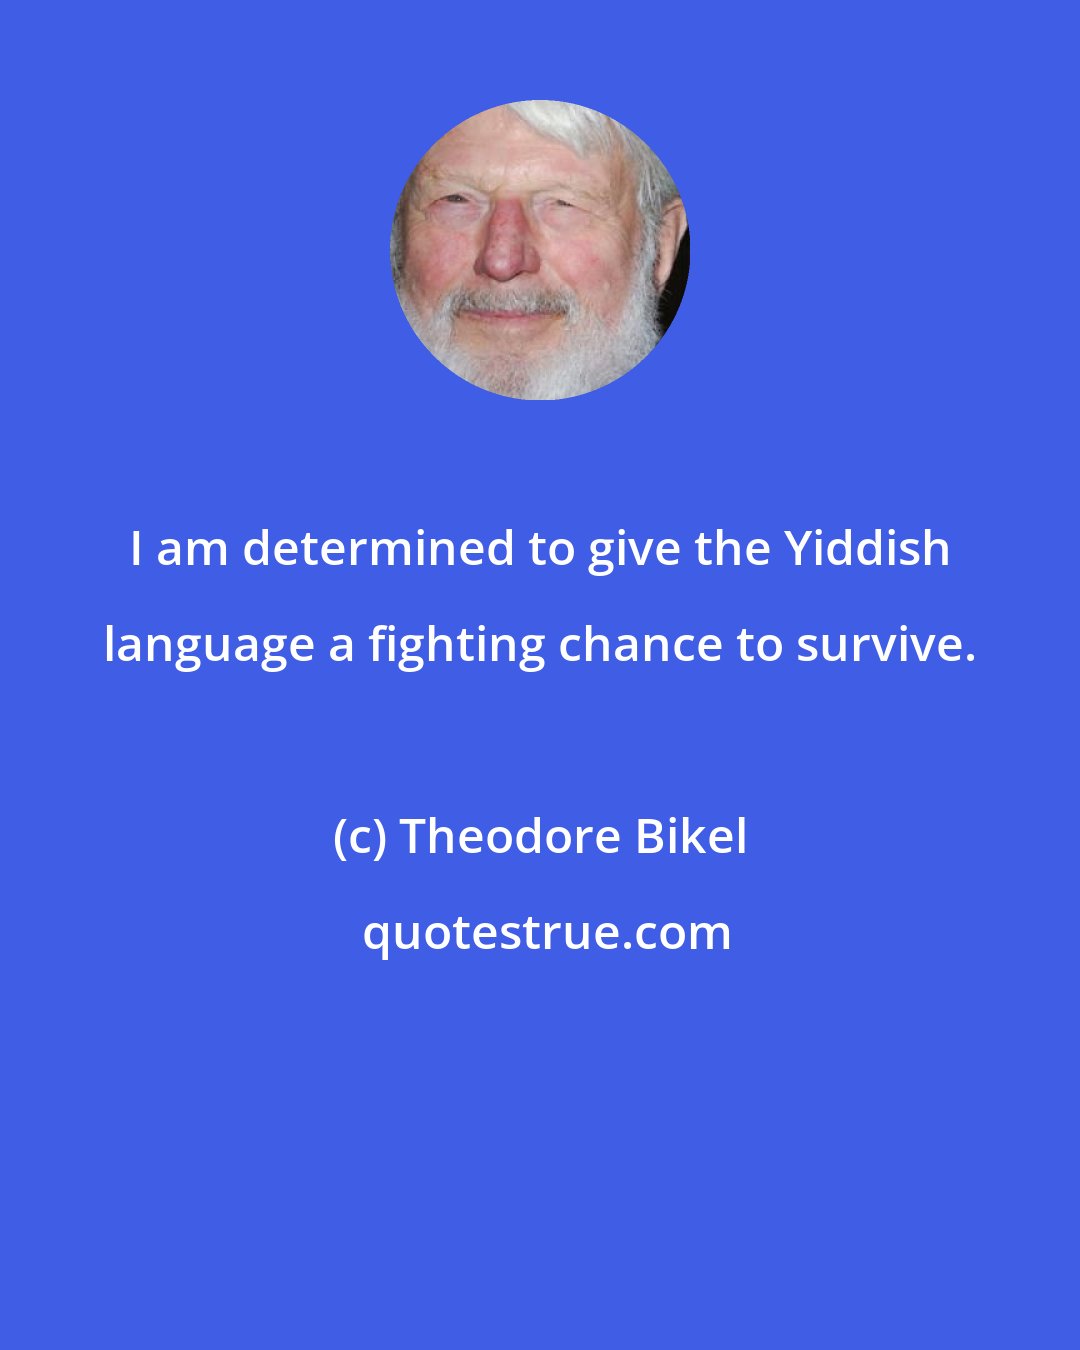 Theodore Bikel: I am determined to give the Yiddish language a fighting chance to survive.